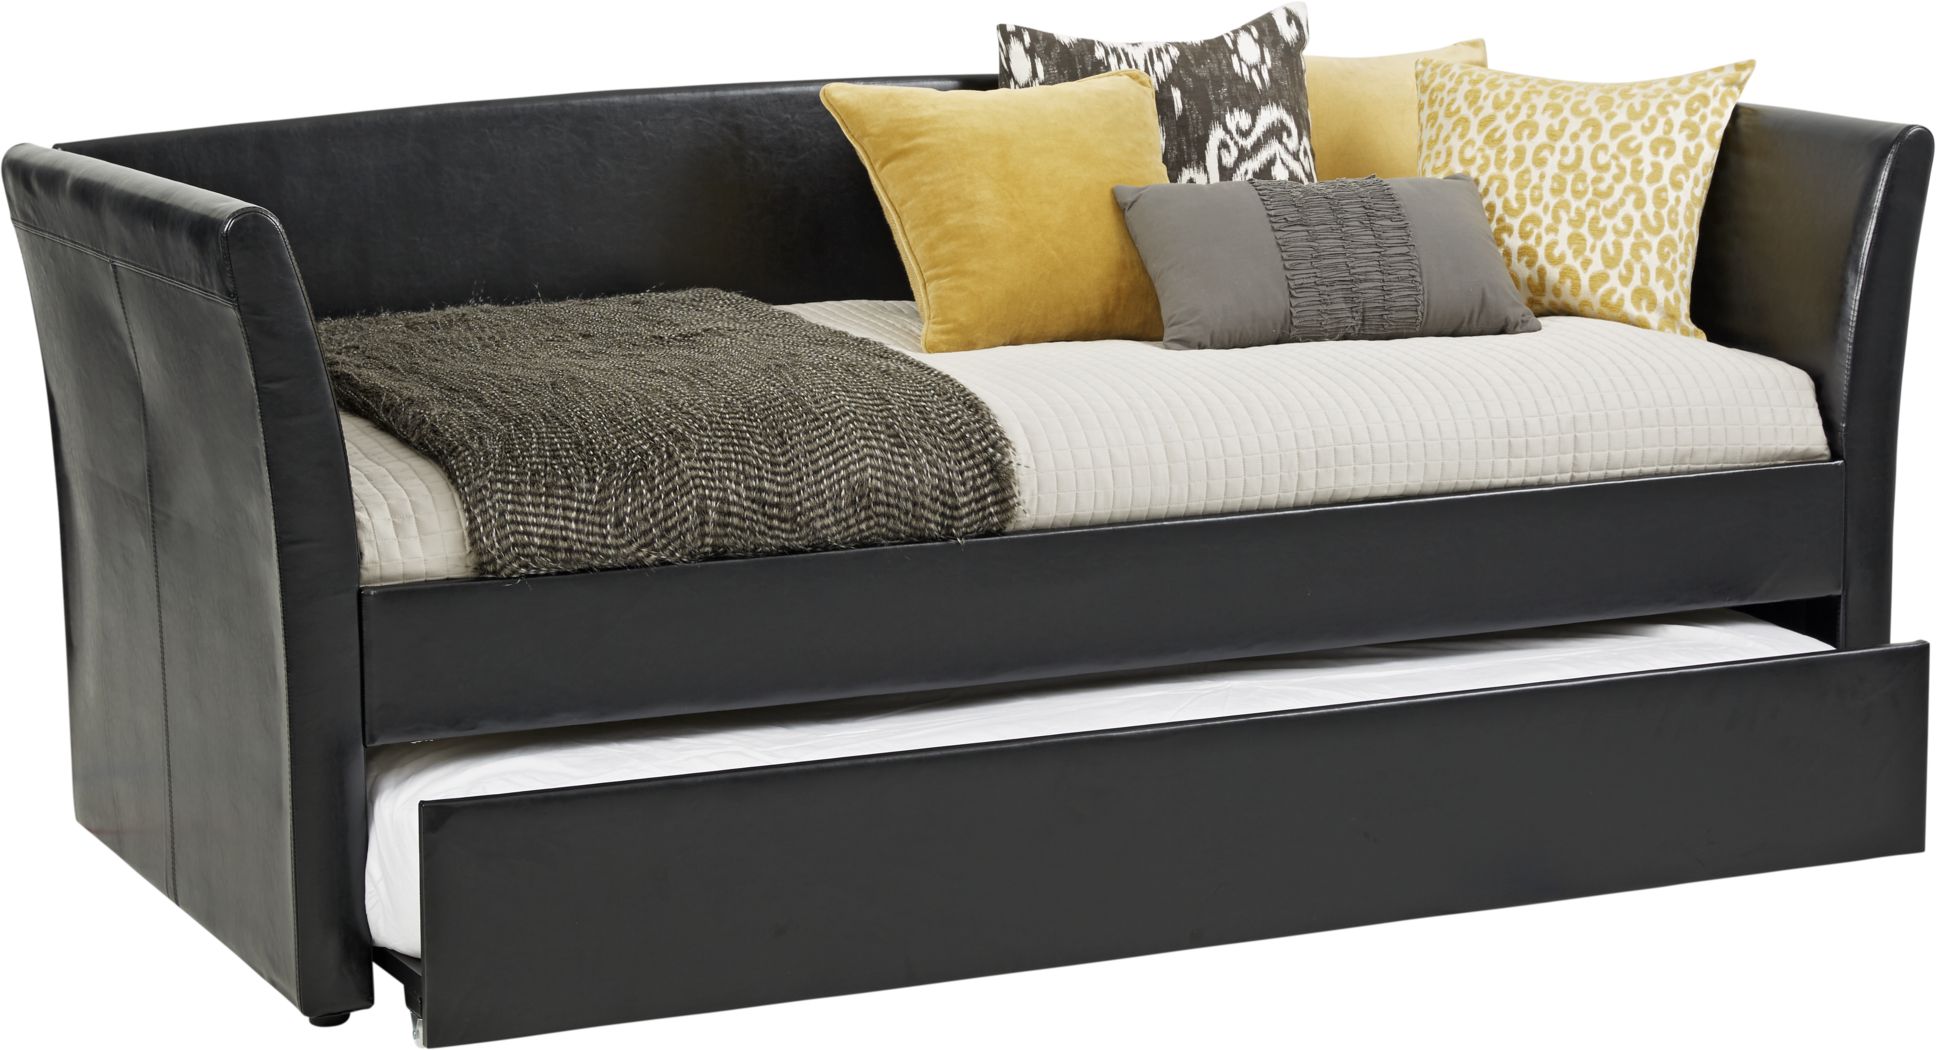 Leather Daybeds With Trundle, Faux Leather Daybed With Trundle